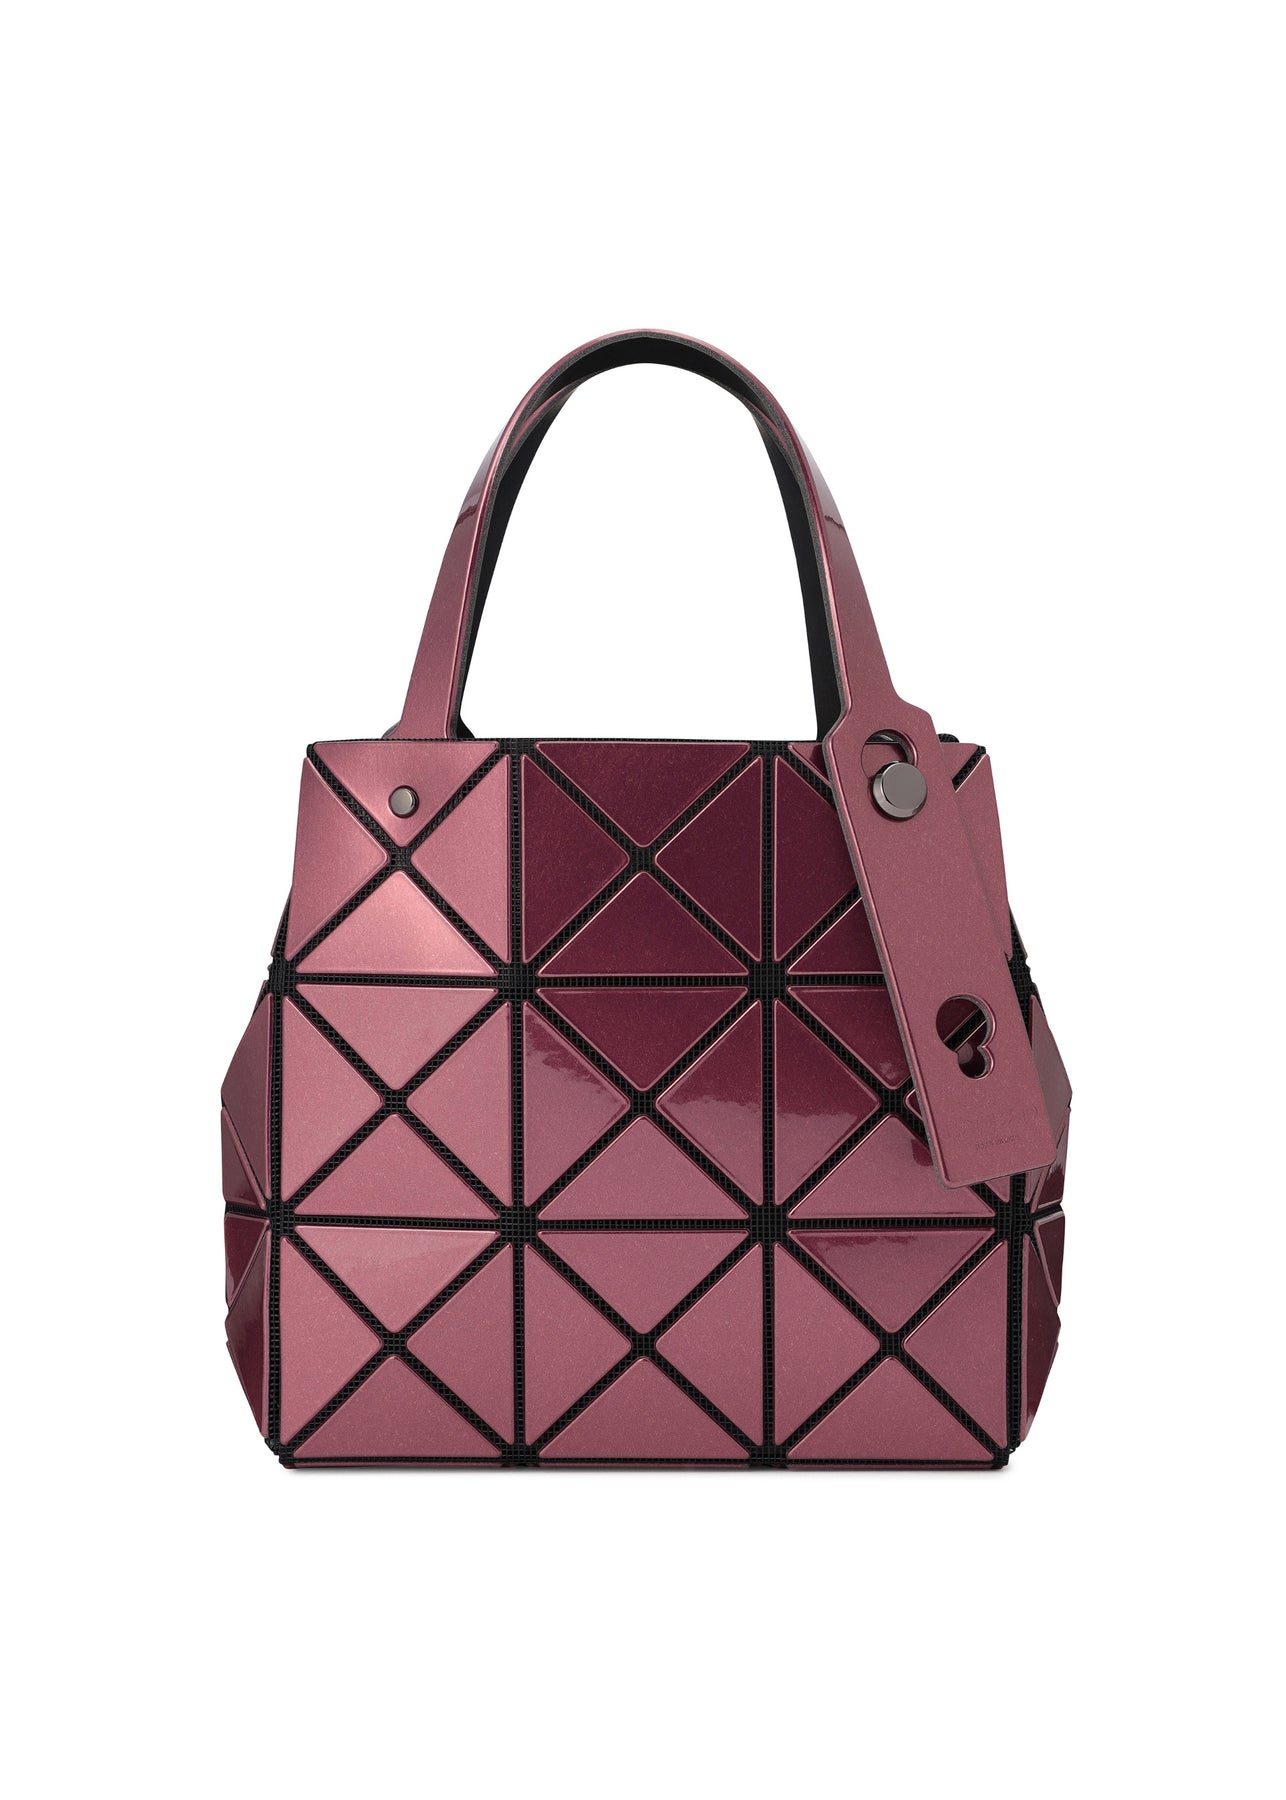 CARAT-2 HANDBAG | The official ISSEY MIYAKE ONLINE STORE | ISSEY 